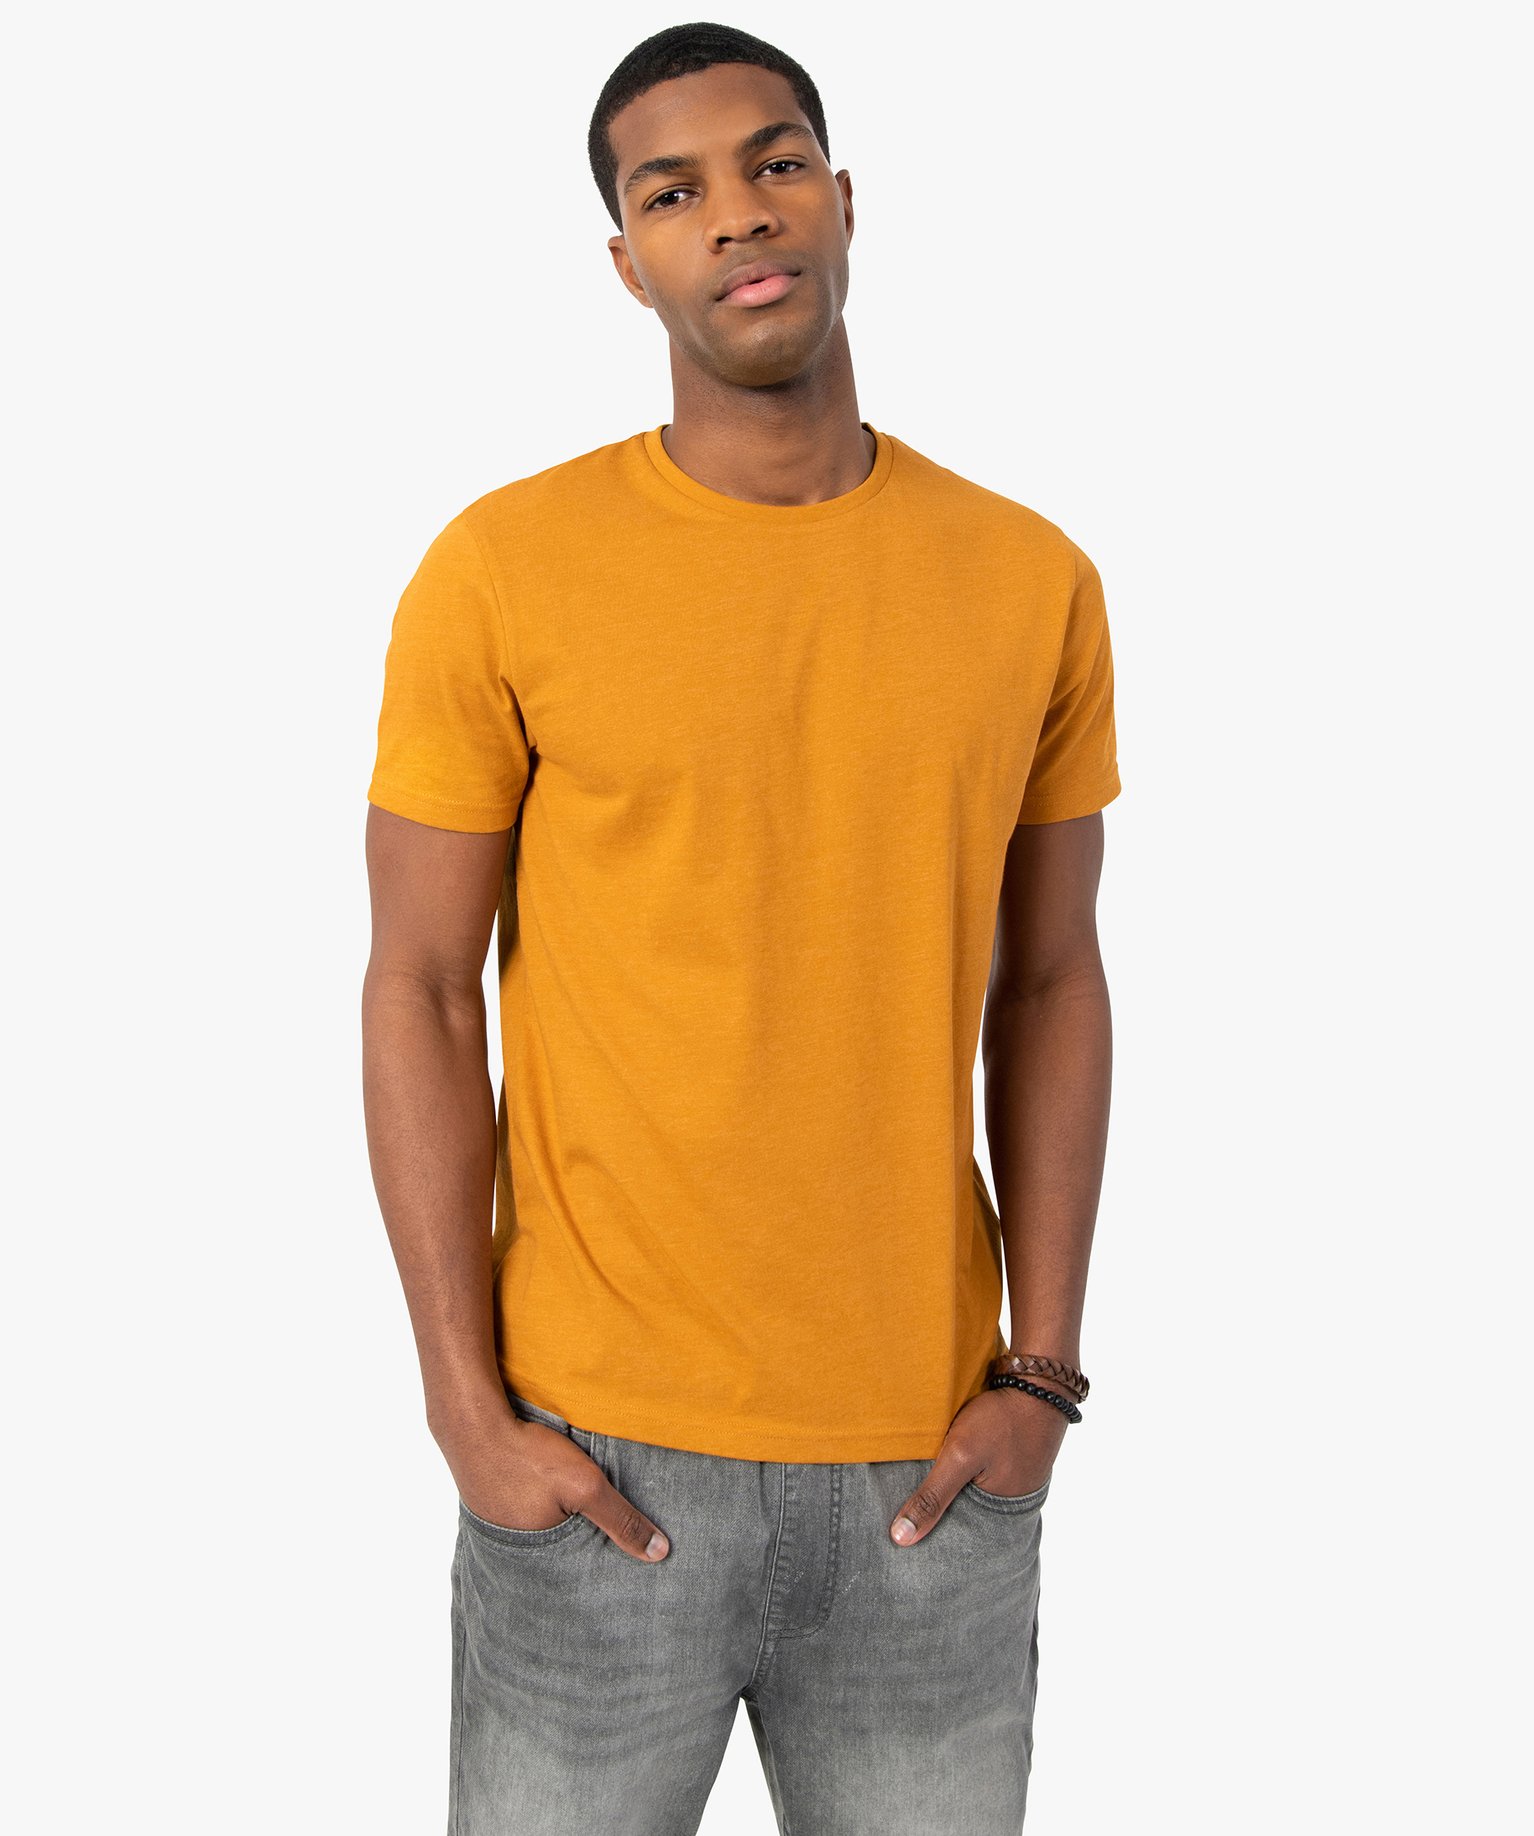 tee-shirt homme a manches courtes et col rond orange tee-shirts